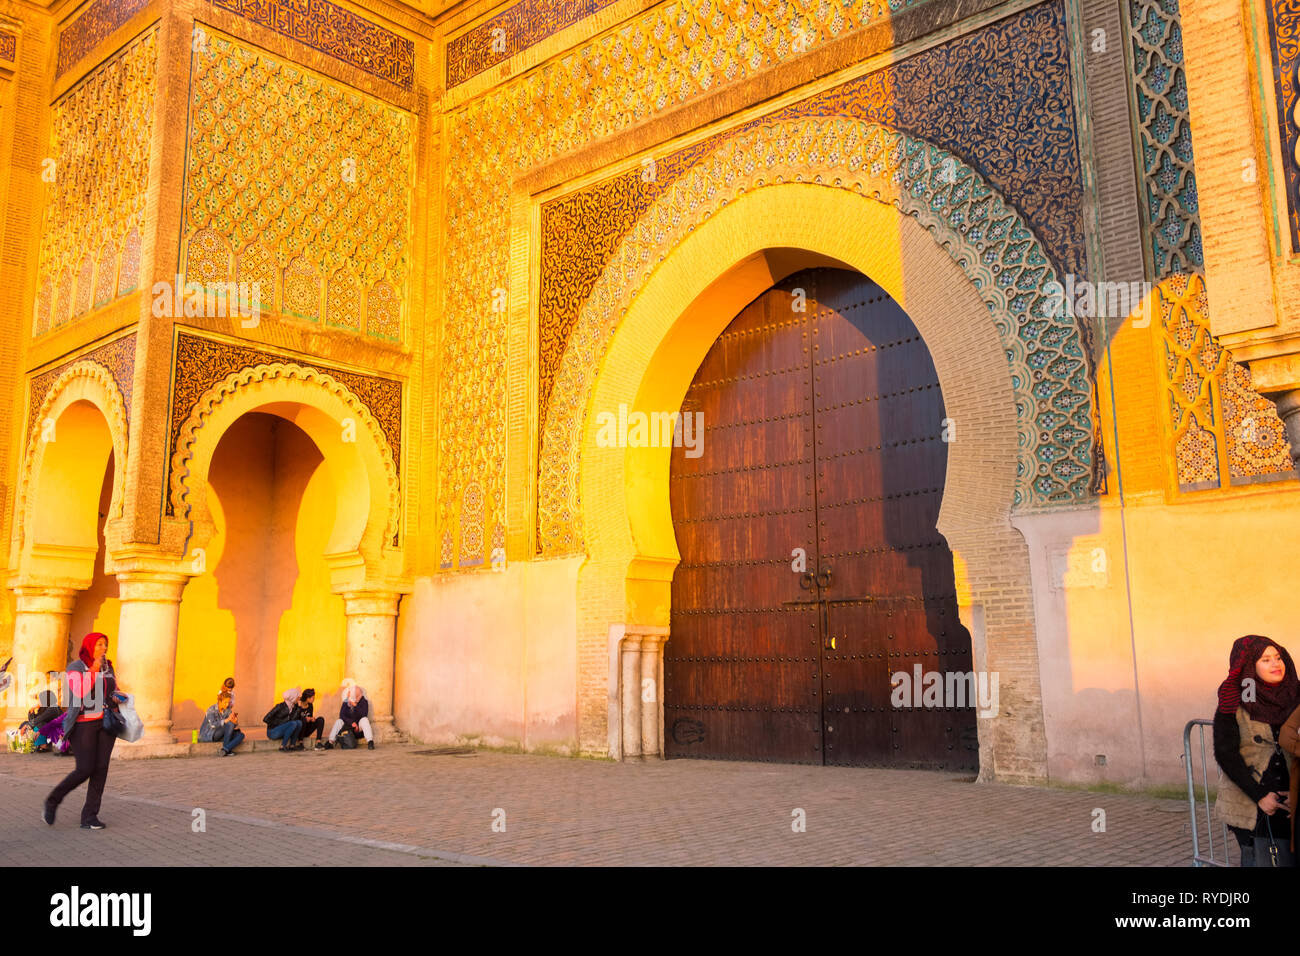 Meknes, Morocco - April 4, 2018: Moroccans in front of Bab Al-Mansour historic gate during golden hour late afternoon. Horizontal Stock Photo